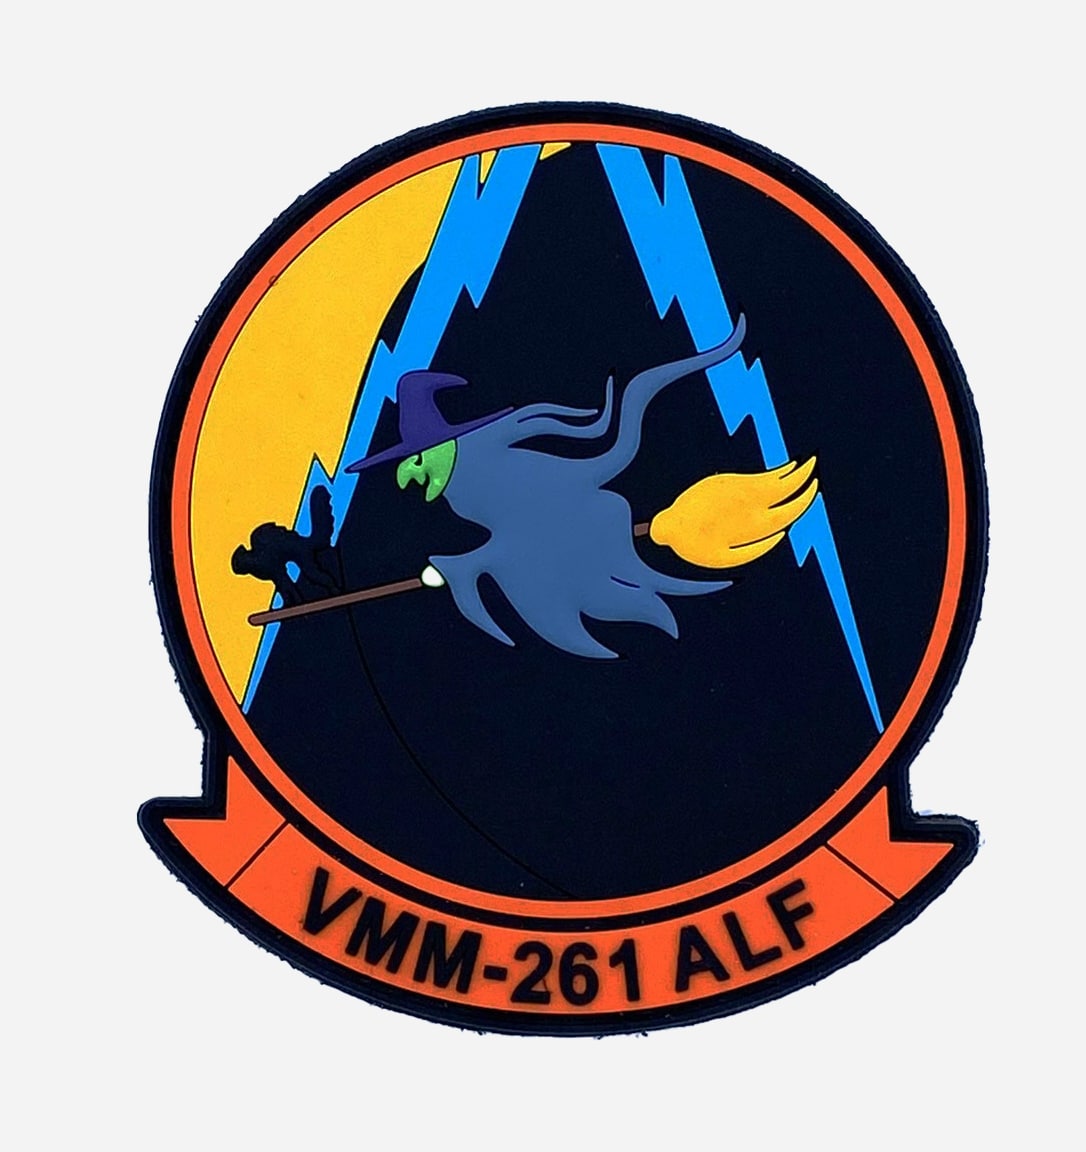 VMM-261 Halloween PVC Patch - With Hook and Loop